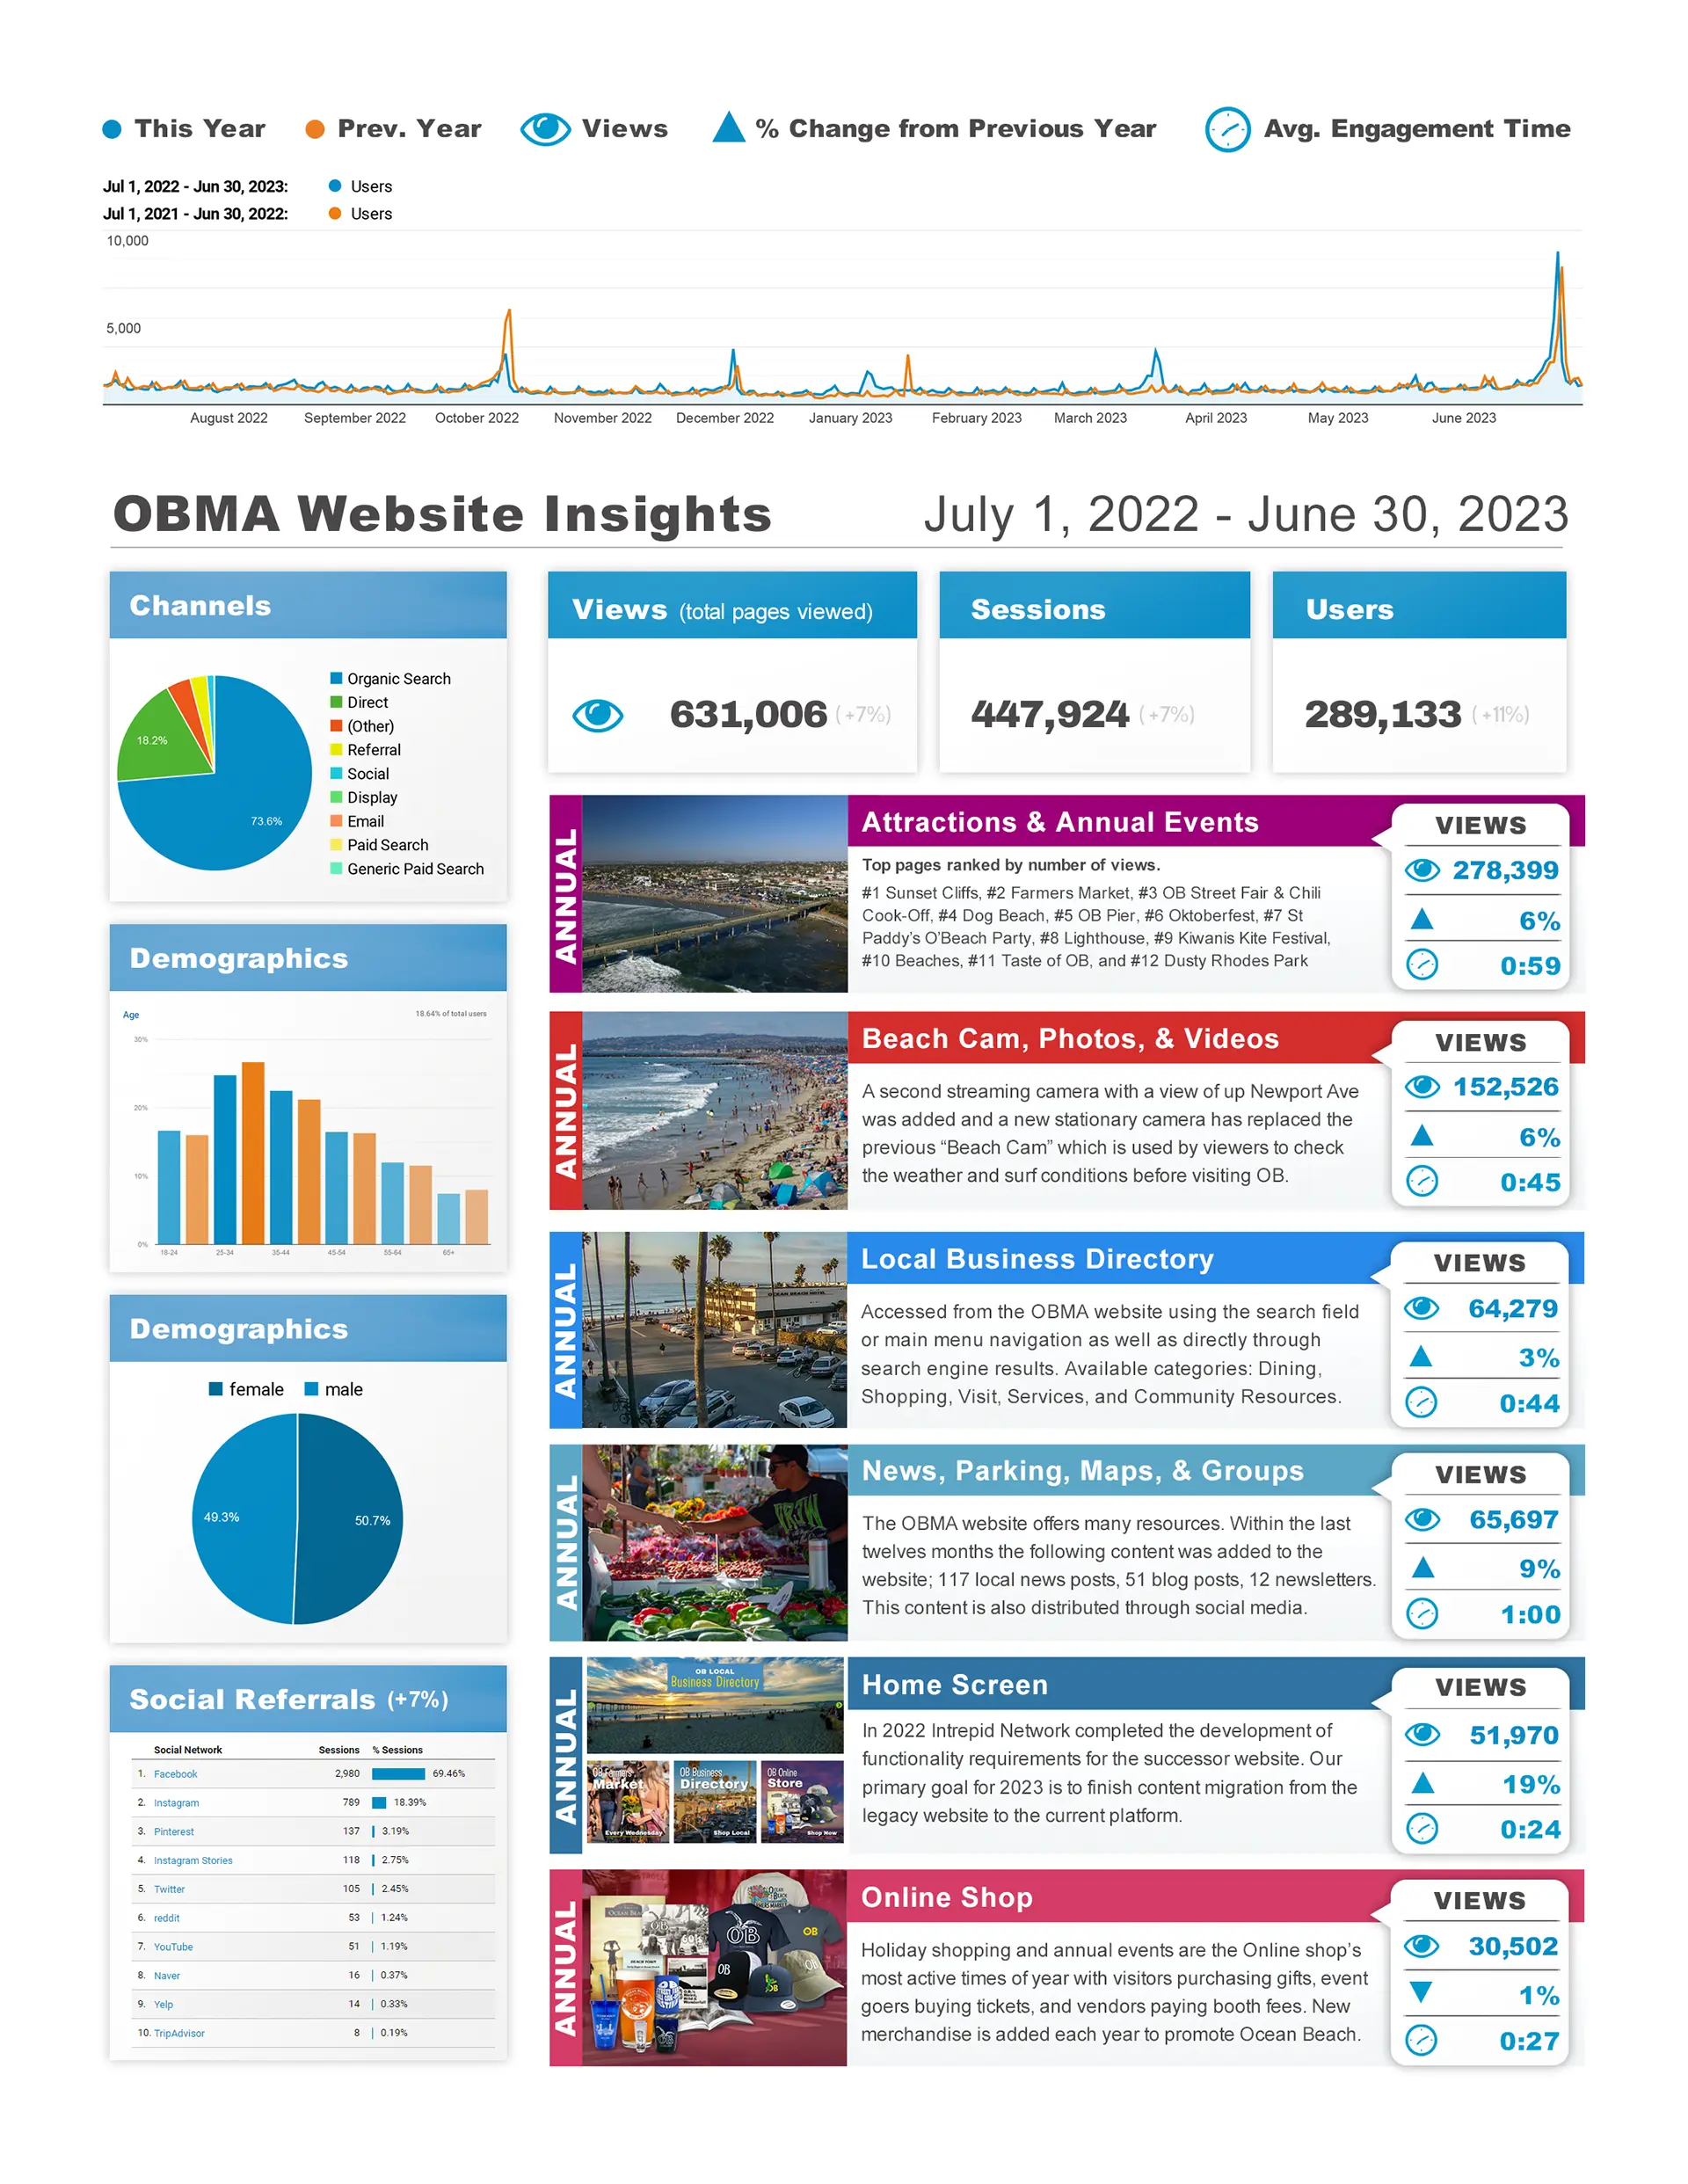 OBMA Website Insights